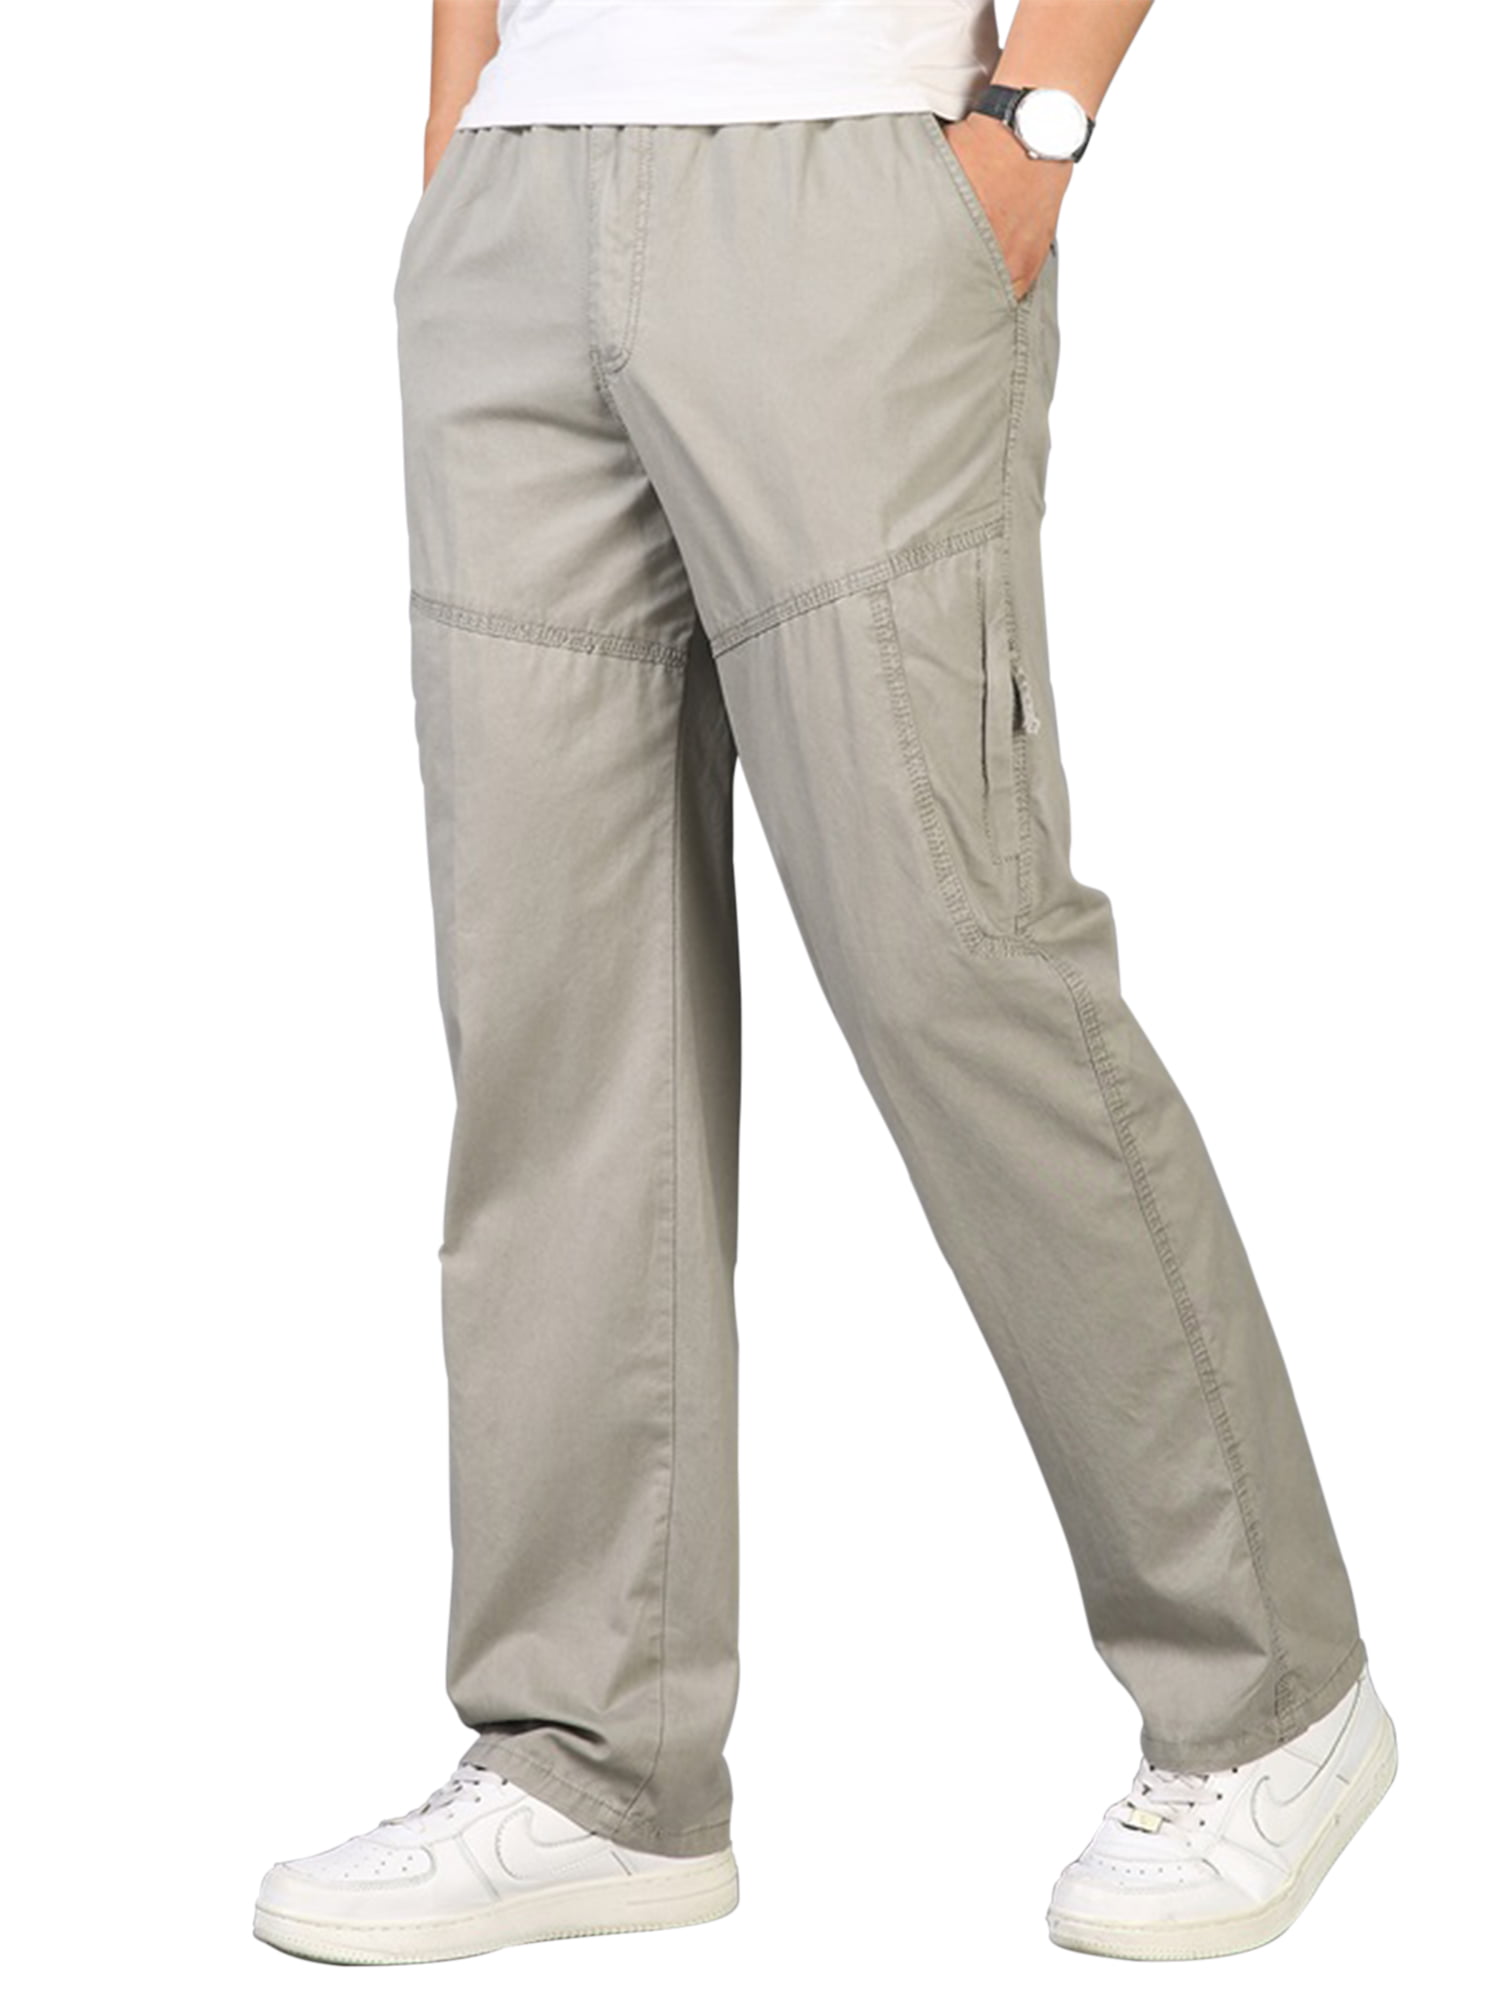 New Mens Hutson Harbour Elasticated Rugby Combat Cargo Work Loose Fit Trousers 